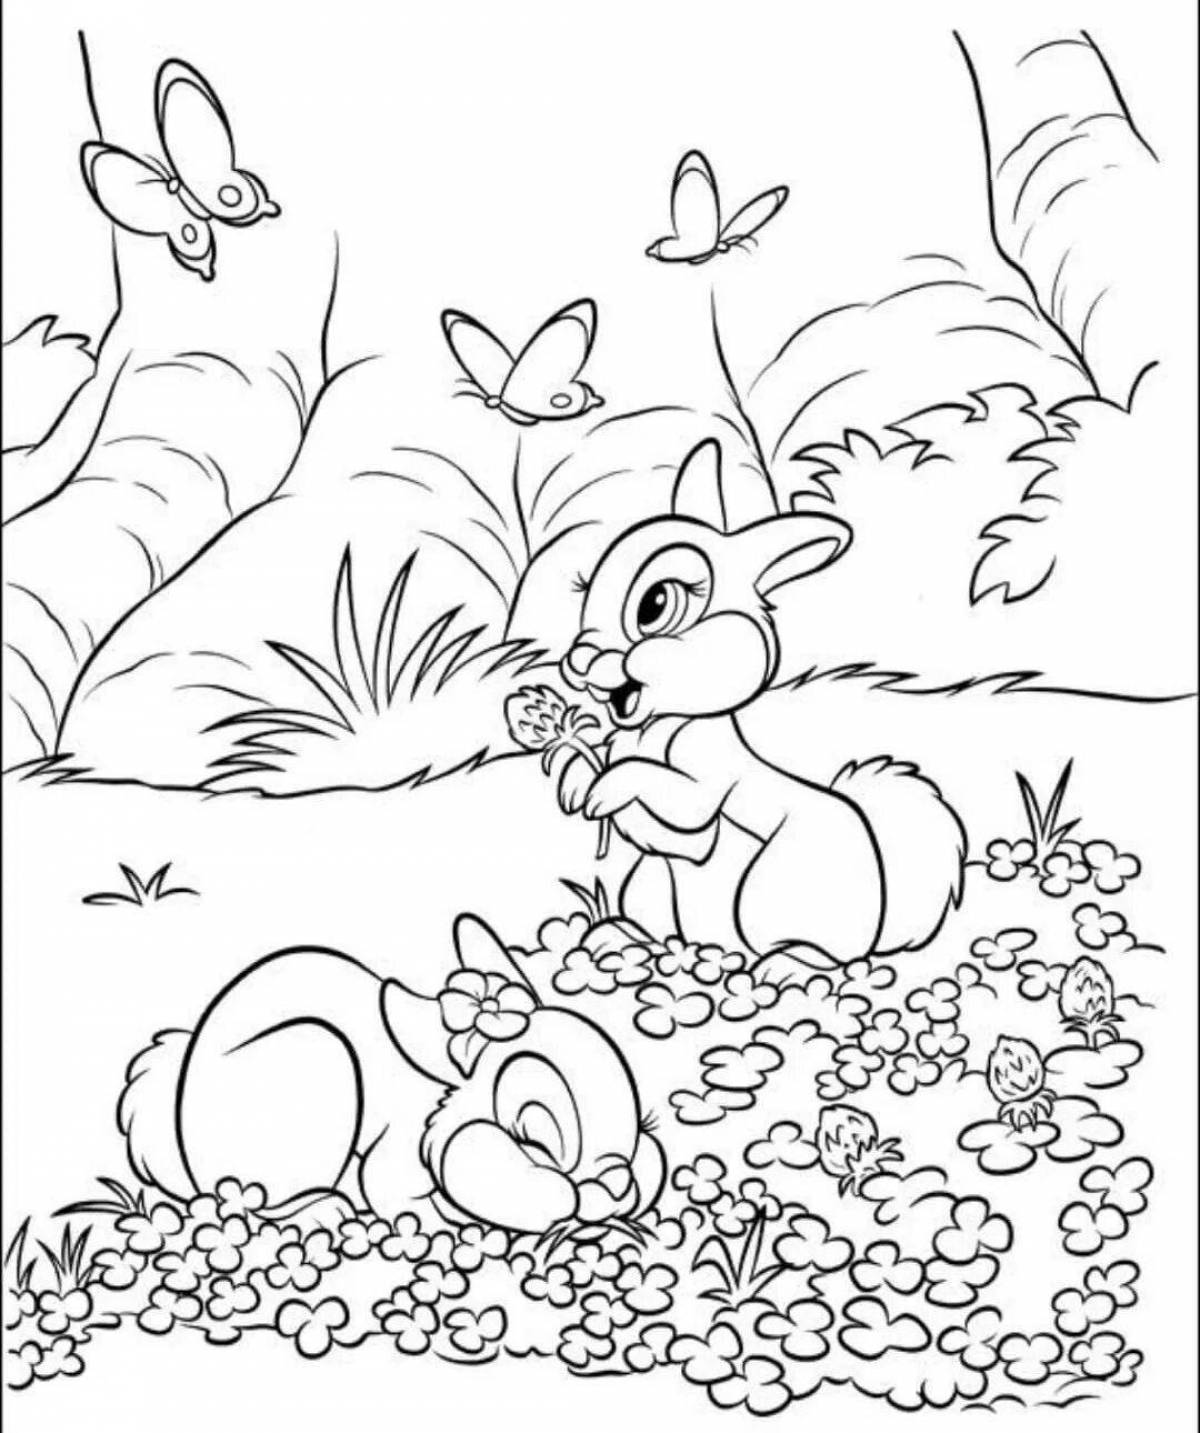 Inviting forest glade coloring page